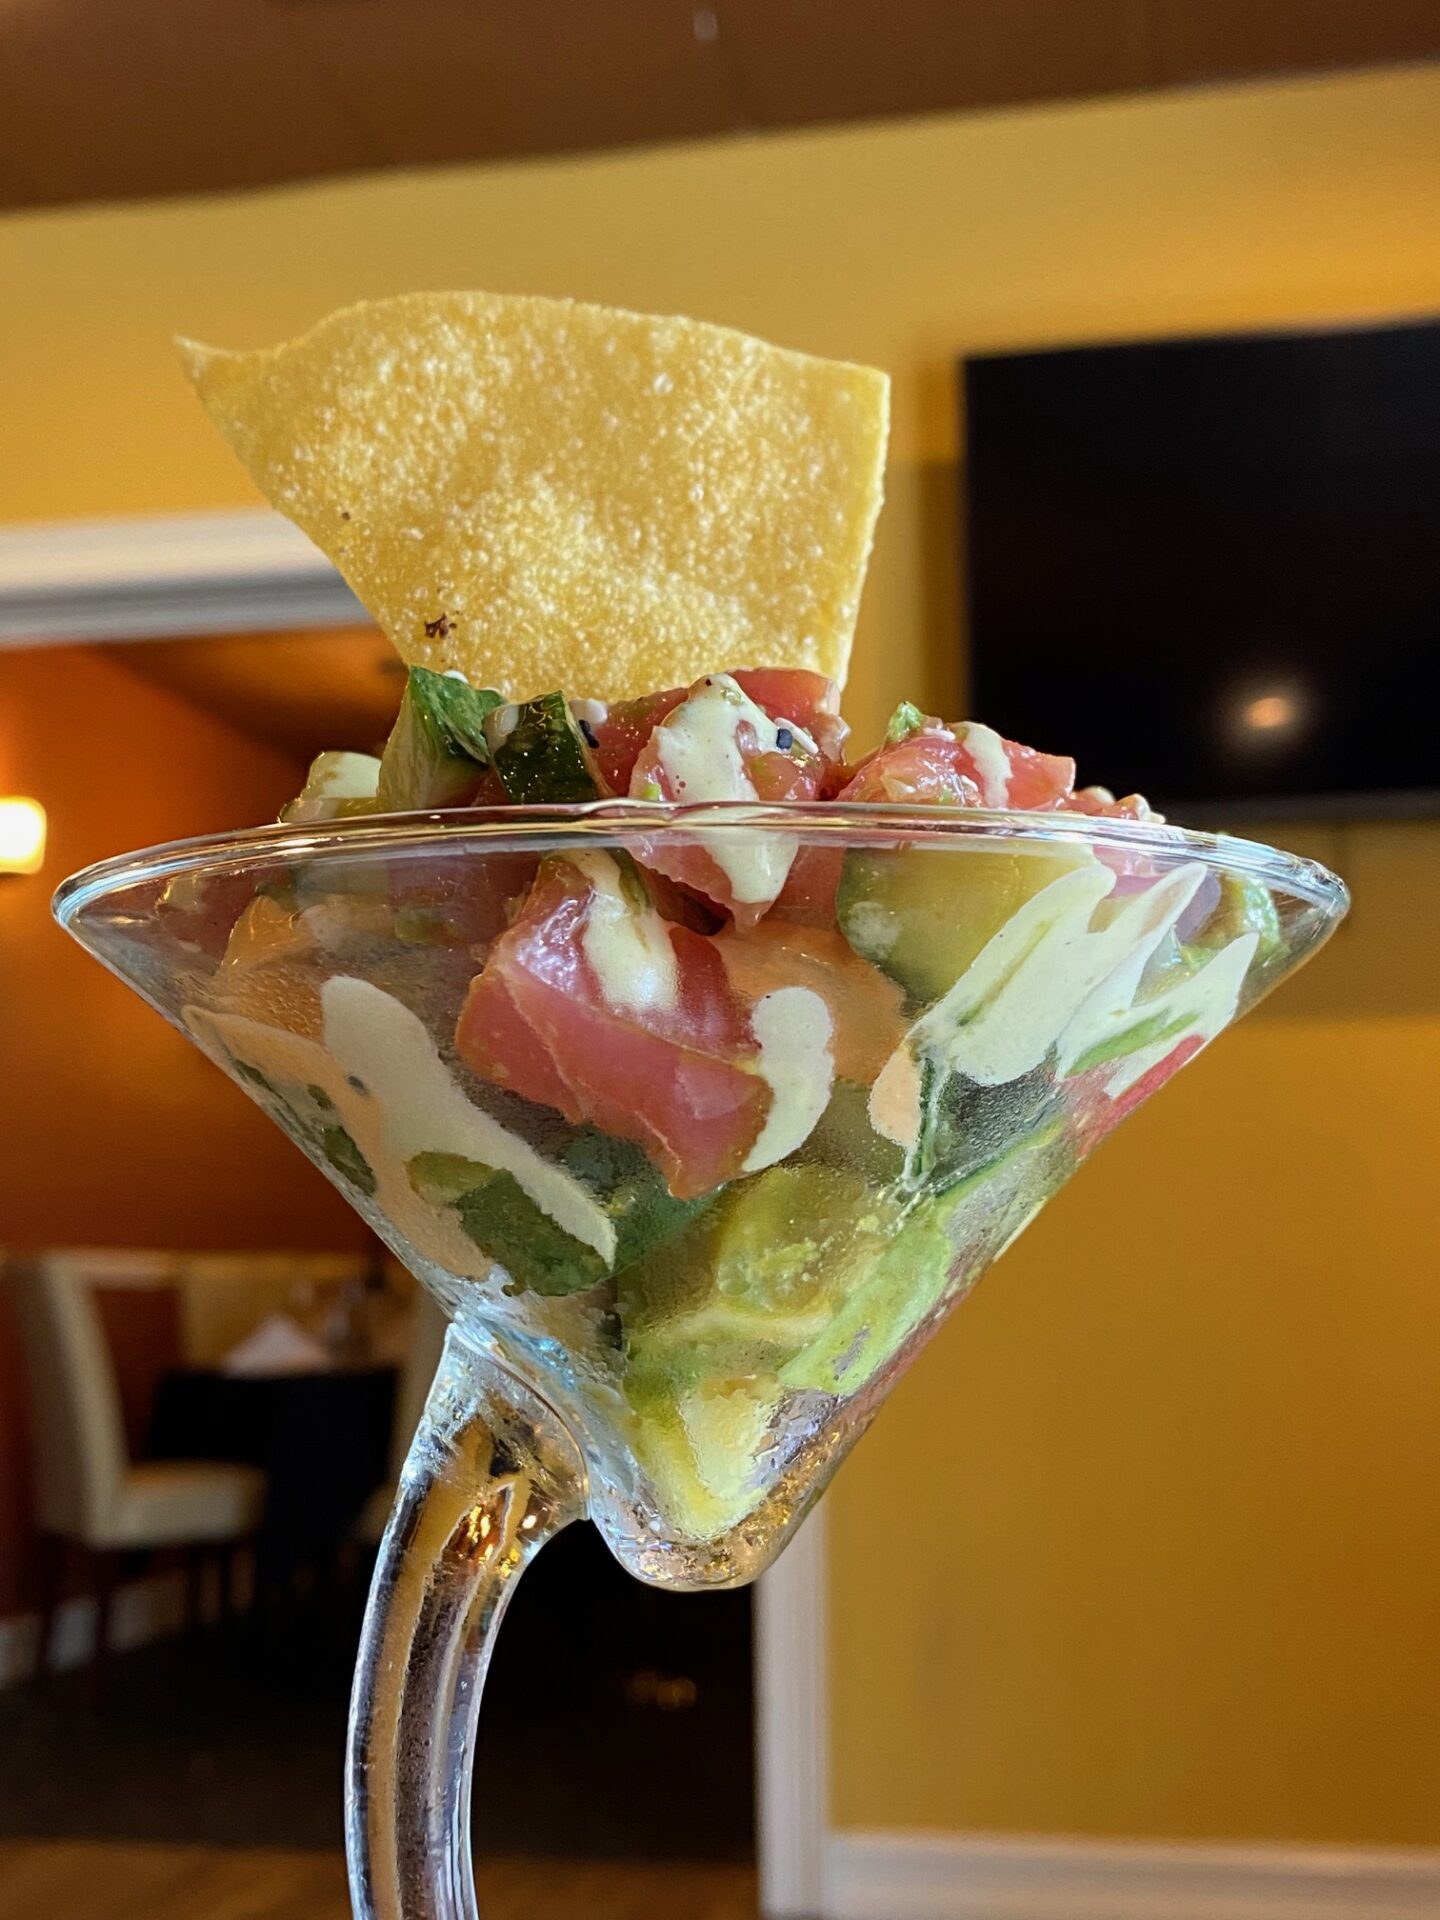 Tortilla chip standing upright on top of fresh salsa placed in a cocktail glass with a curved handle